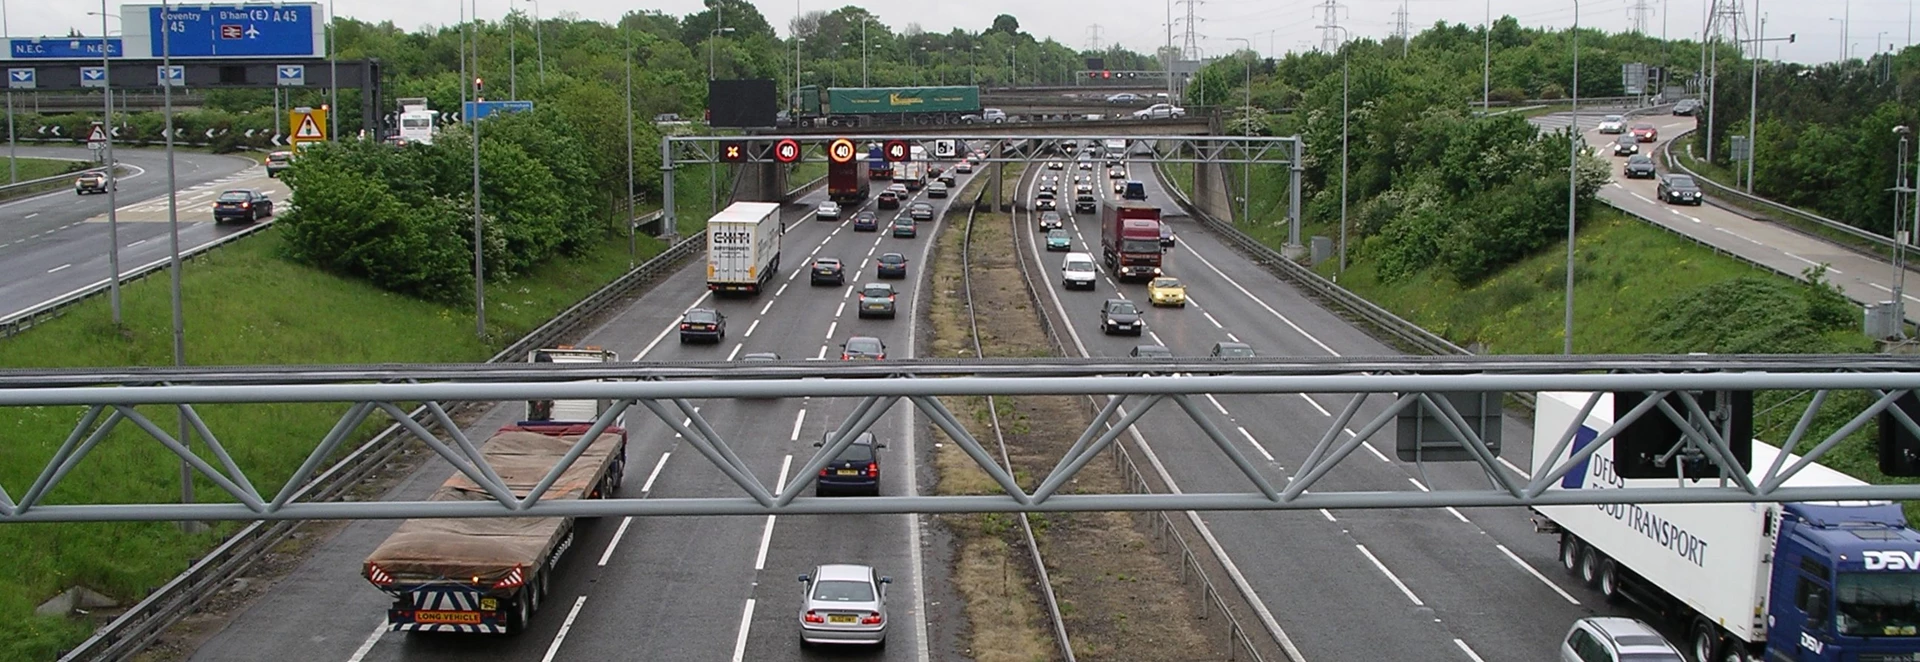 Motorways could be covered by tunnels to absorb pollution 